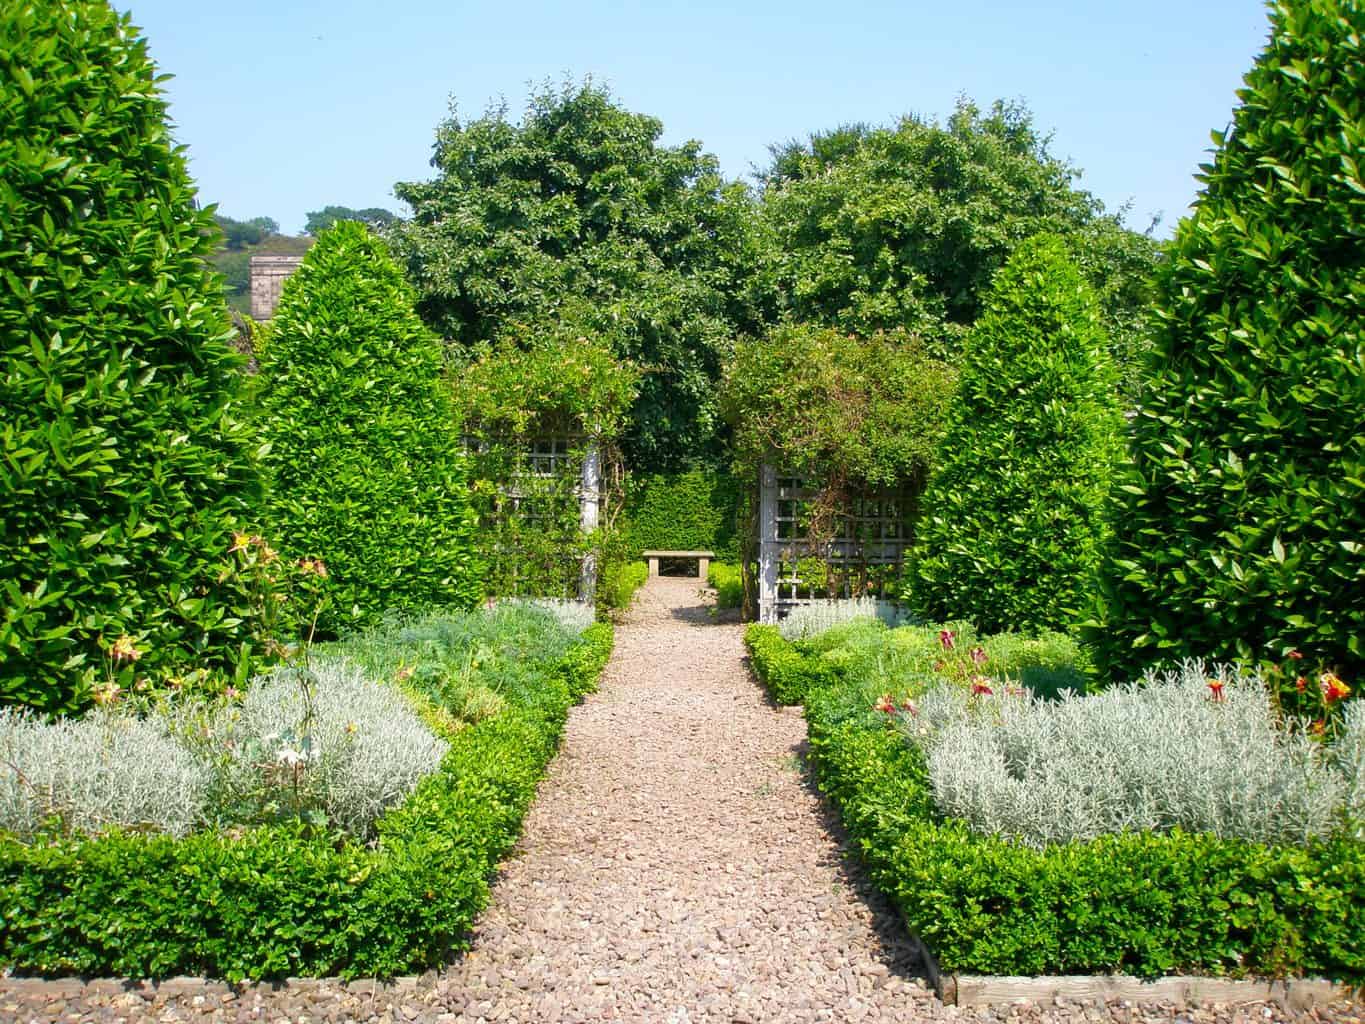 The quiet charm, well-manicured paths, and rows of greenery at the garden at Dunbar's Close. 